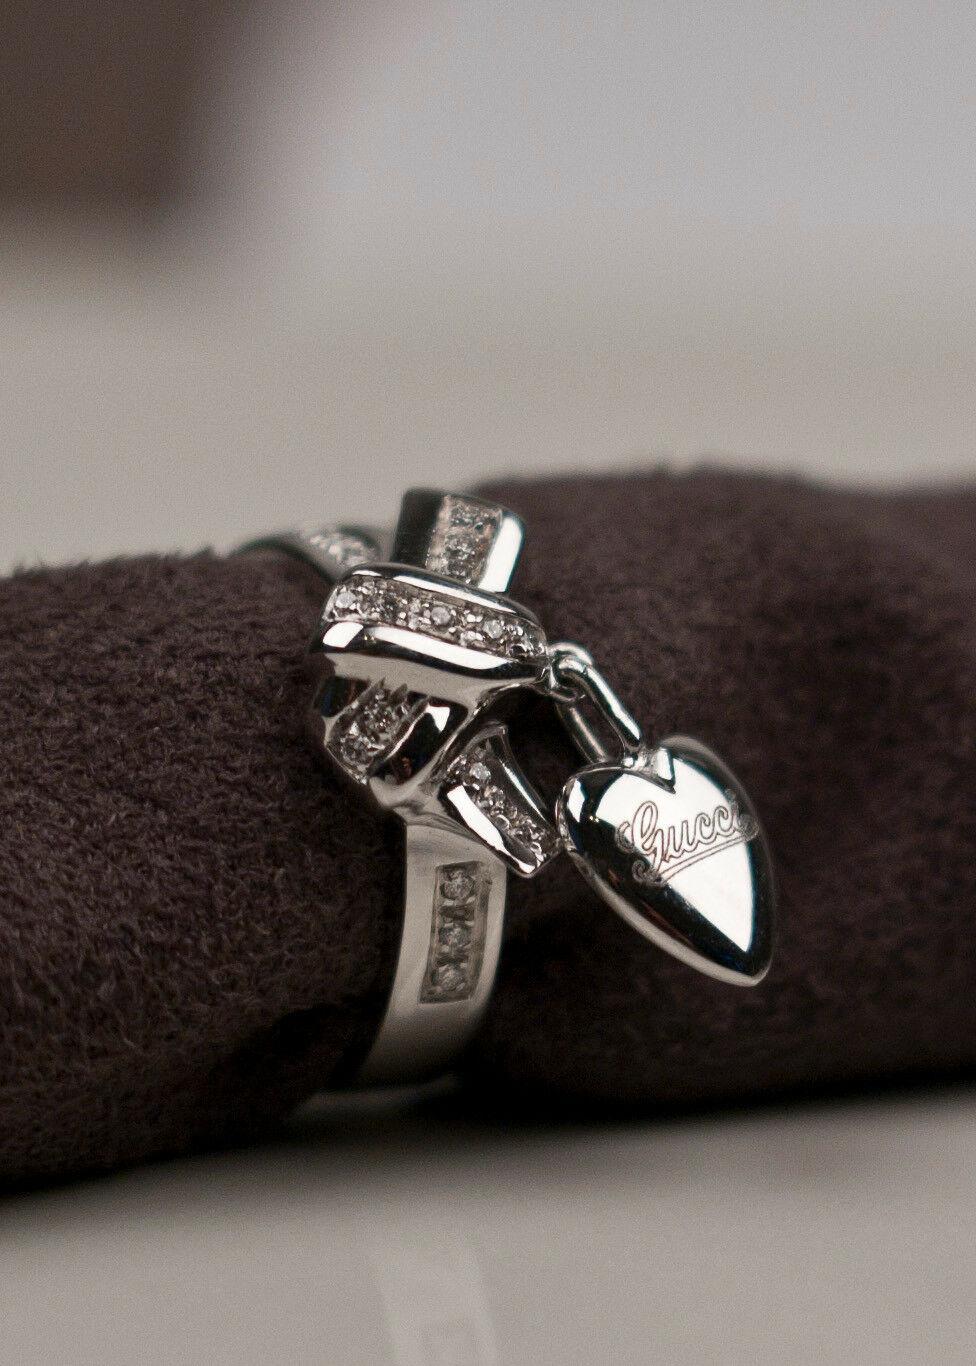 Women's VINTAGE GUCCI 18K WHITE GOLD HEART CHARM RING with DIAMONDS